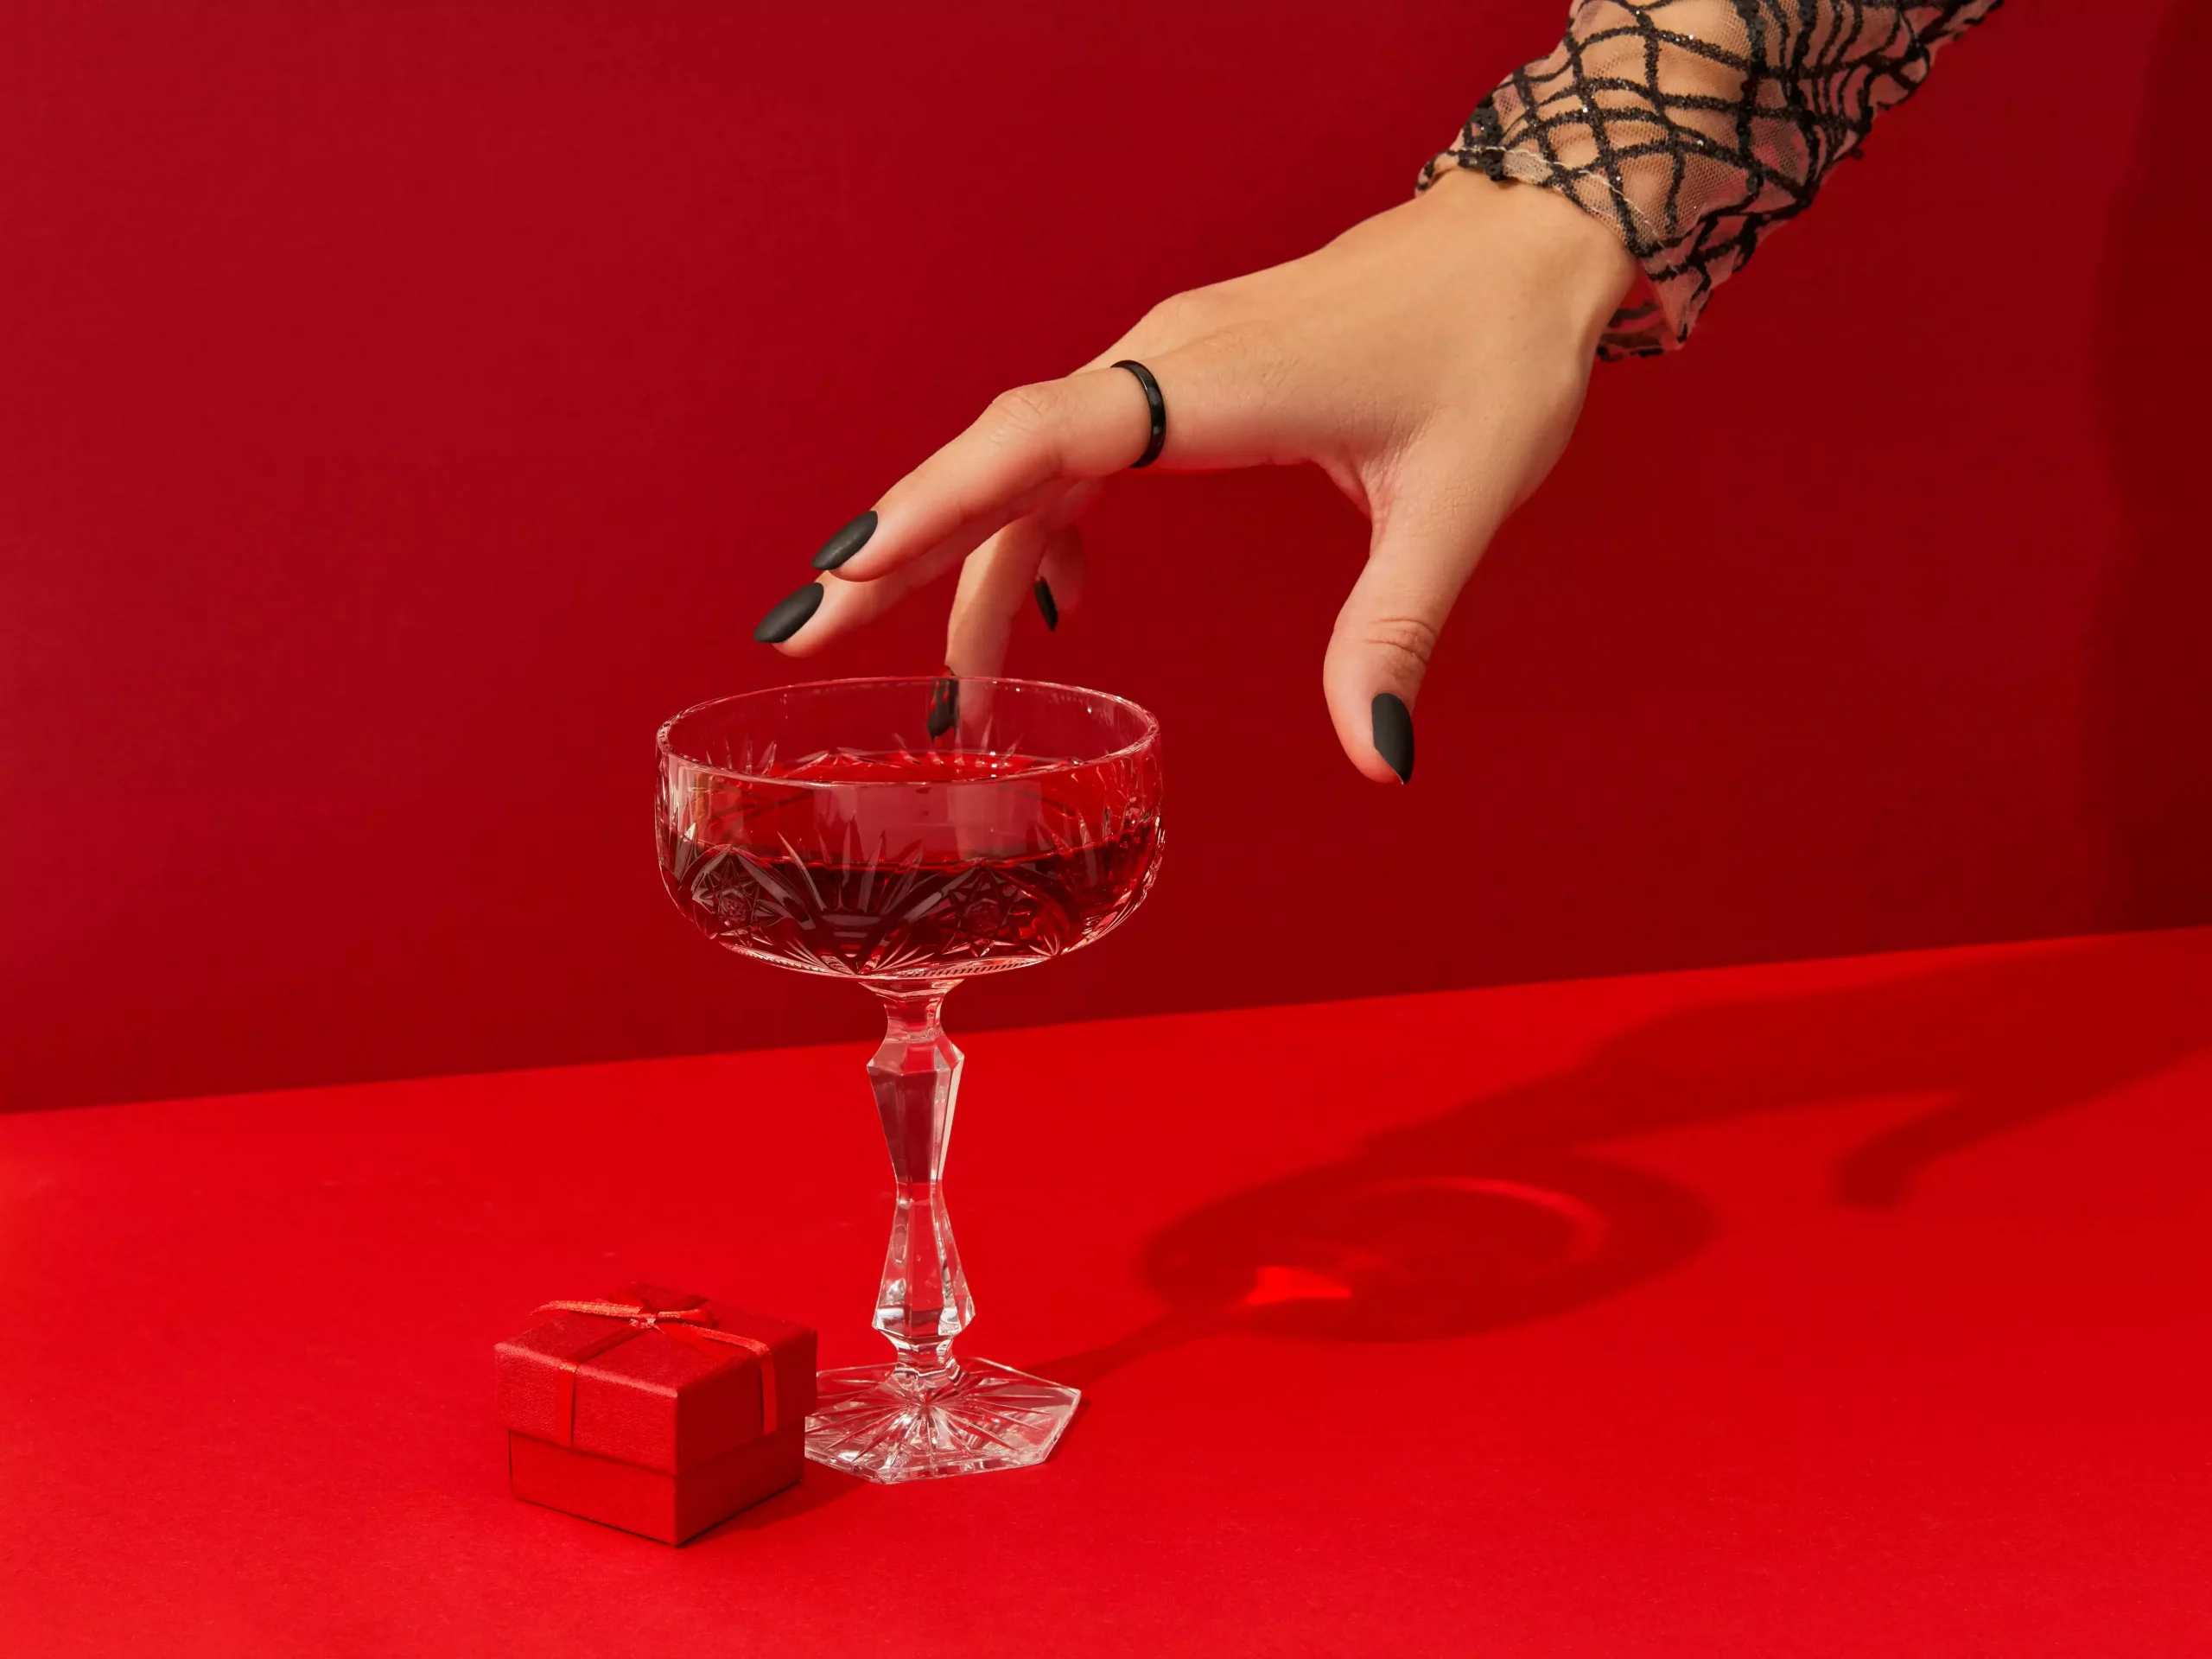 A Japan Cafe Waitress Puts Her Own Blood In Cocktail